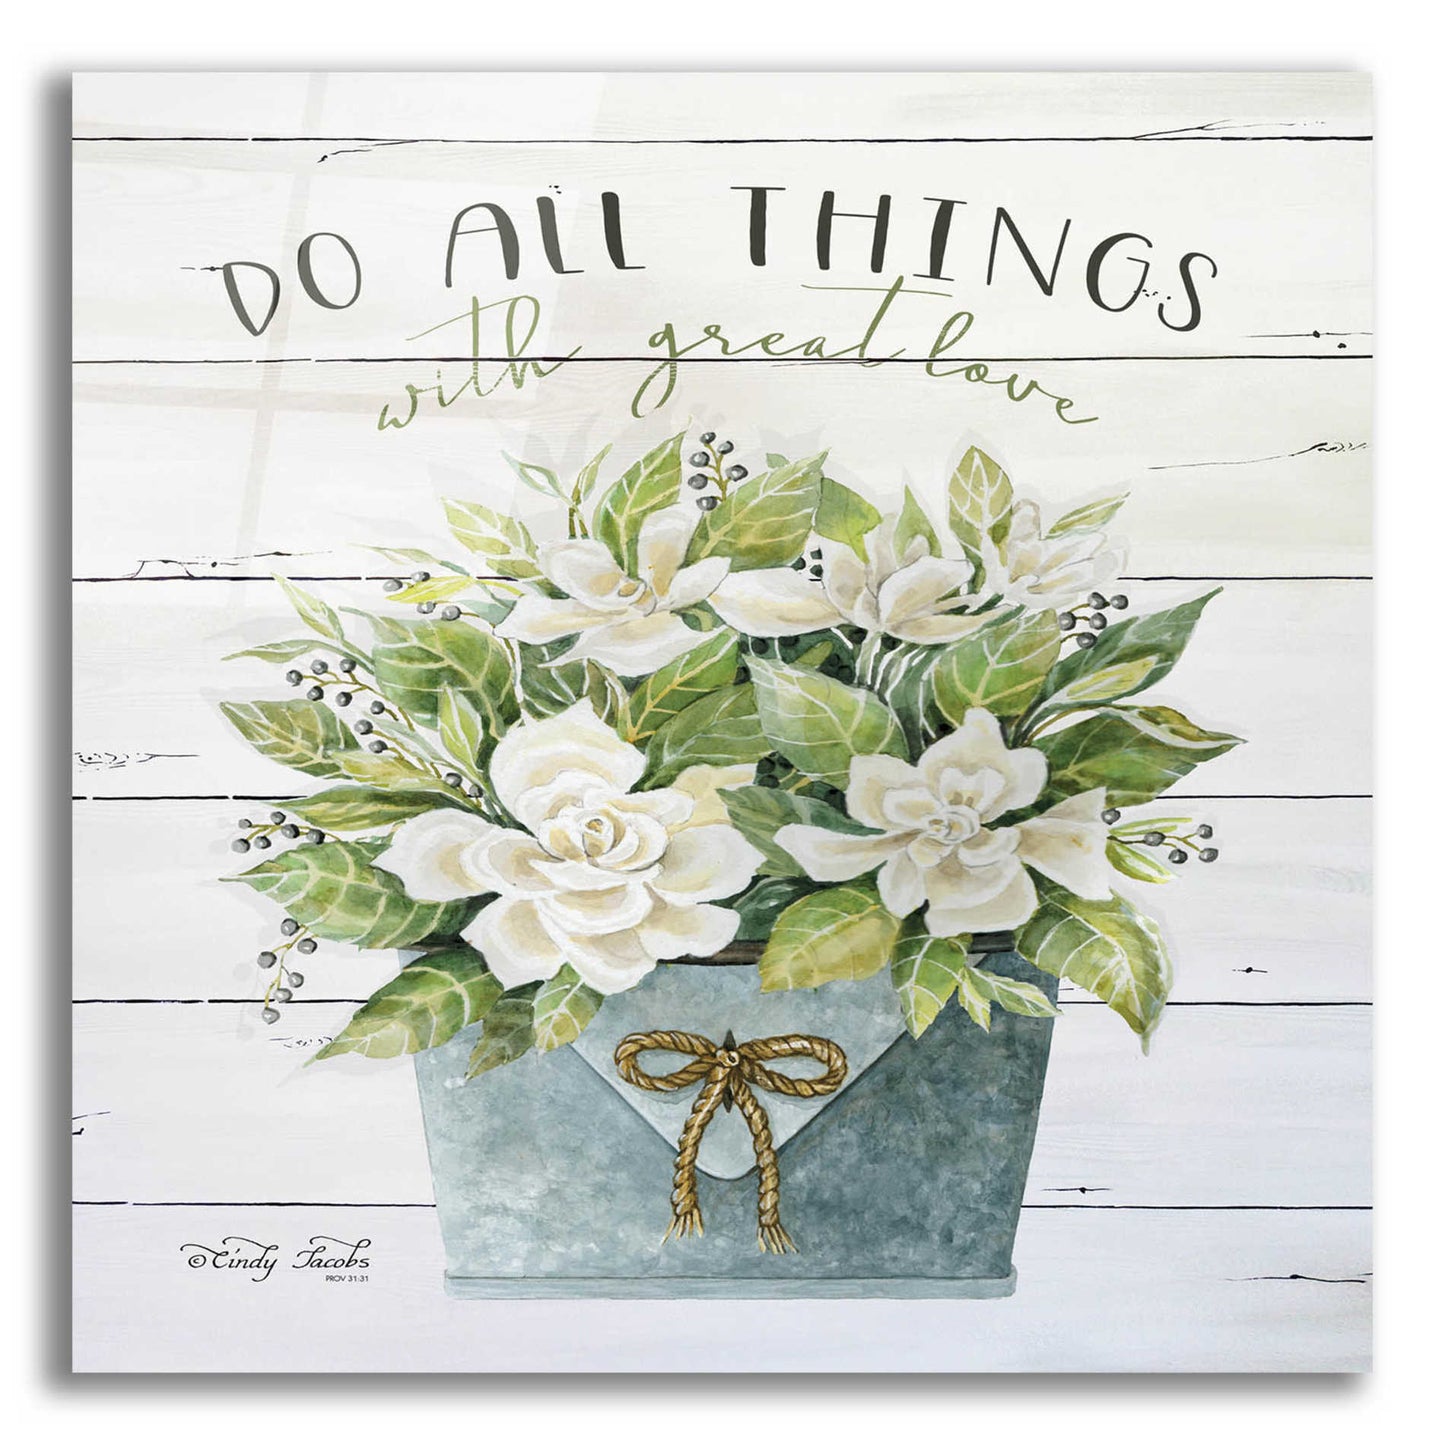 Epic Art 'Do All Things with Great Love' by Cindy Jacobs, Acrylic Glass Wall Art,12x12